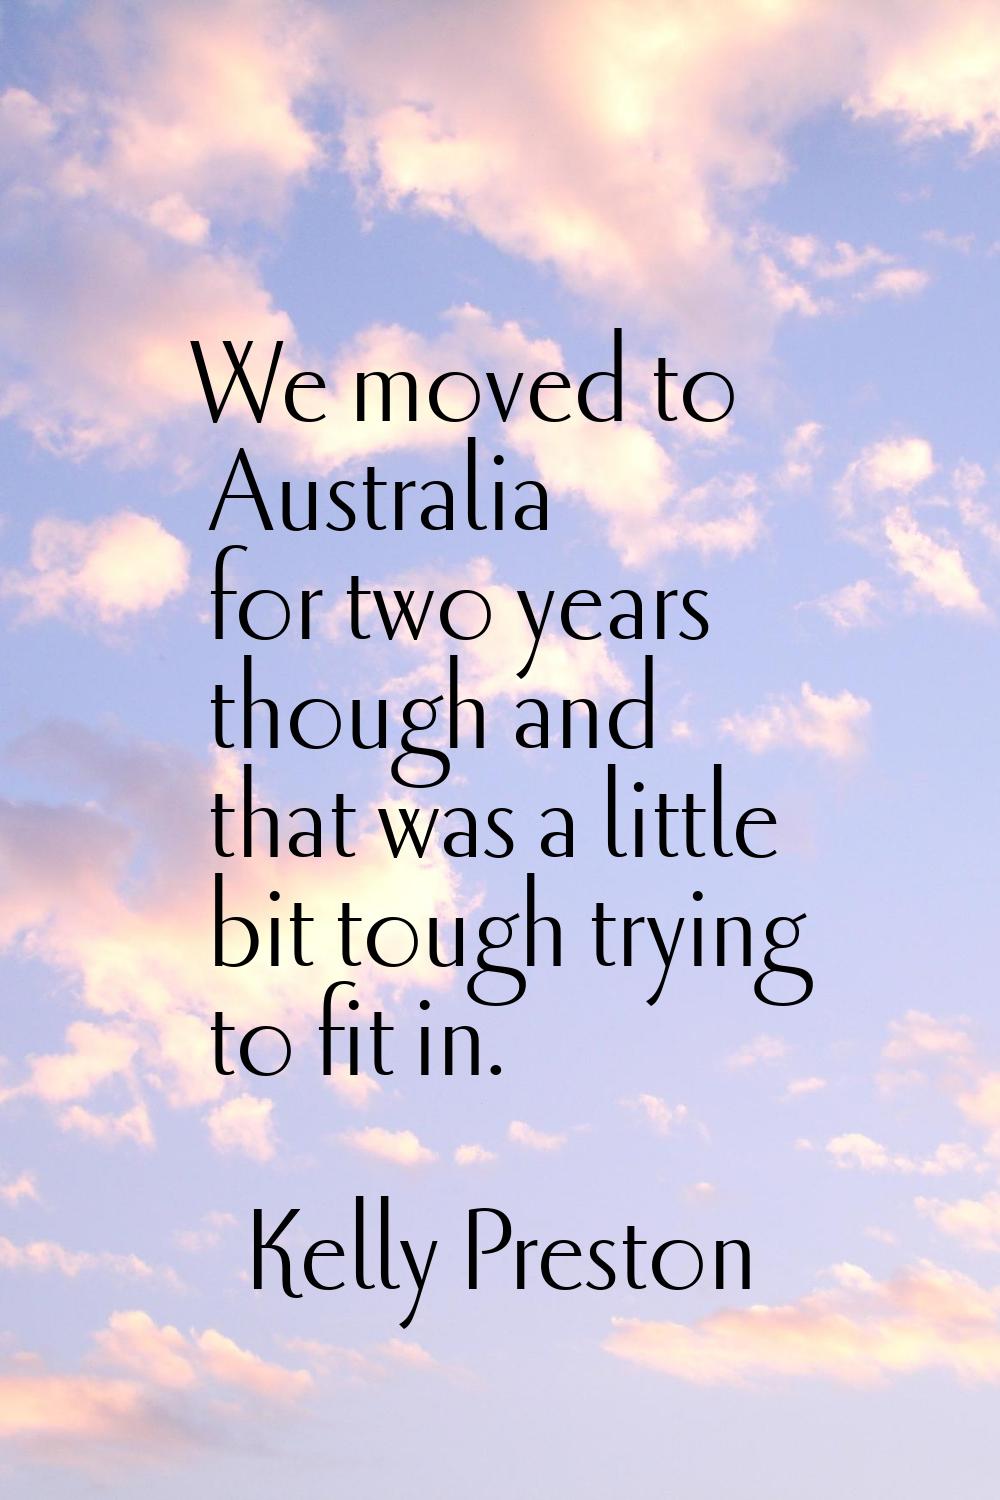 We moved to Australia for two years though and that was a little bit tough trying to fit in.